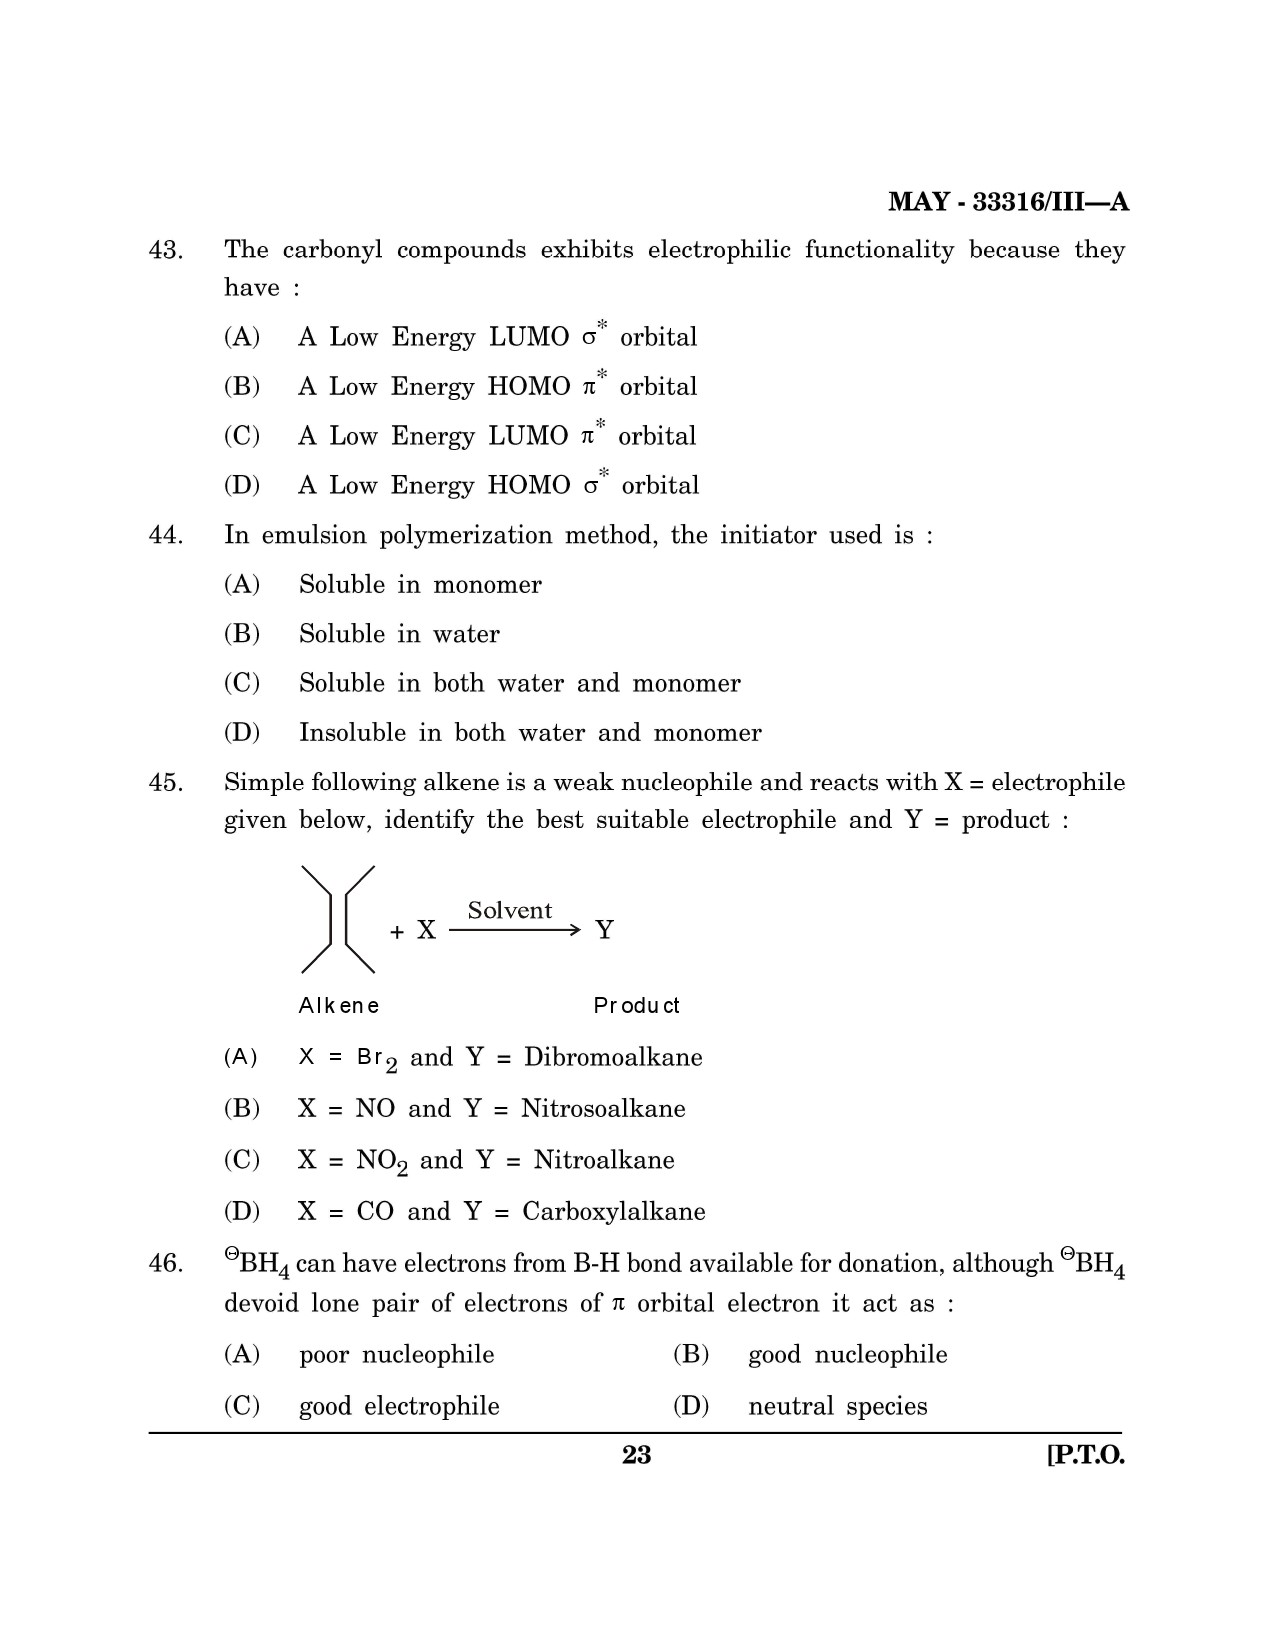 Maharashtra SET Chemical Sciences Question Paper III May 2016 22